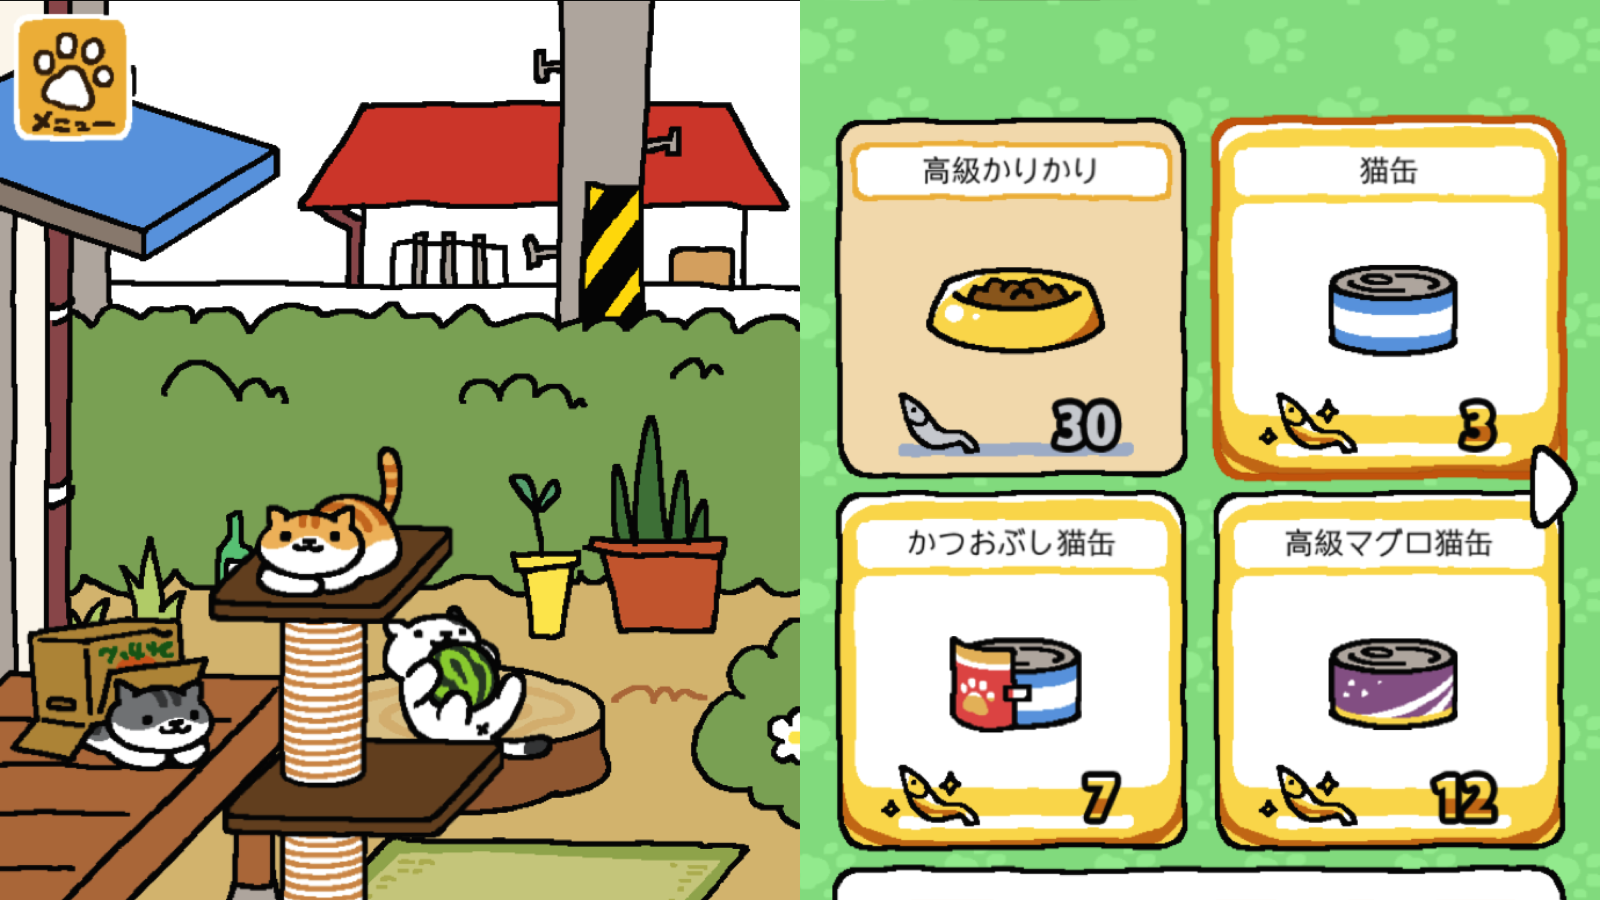 Why Am I Obsessed With a Cellphone Game About Collecting Cats